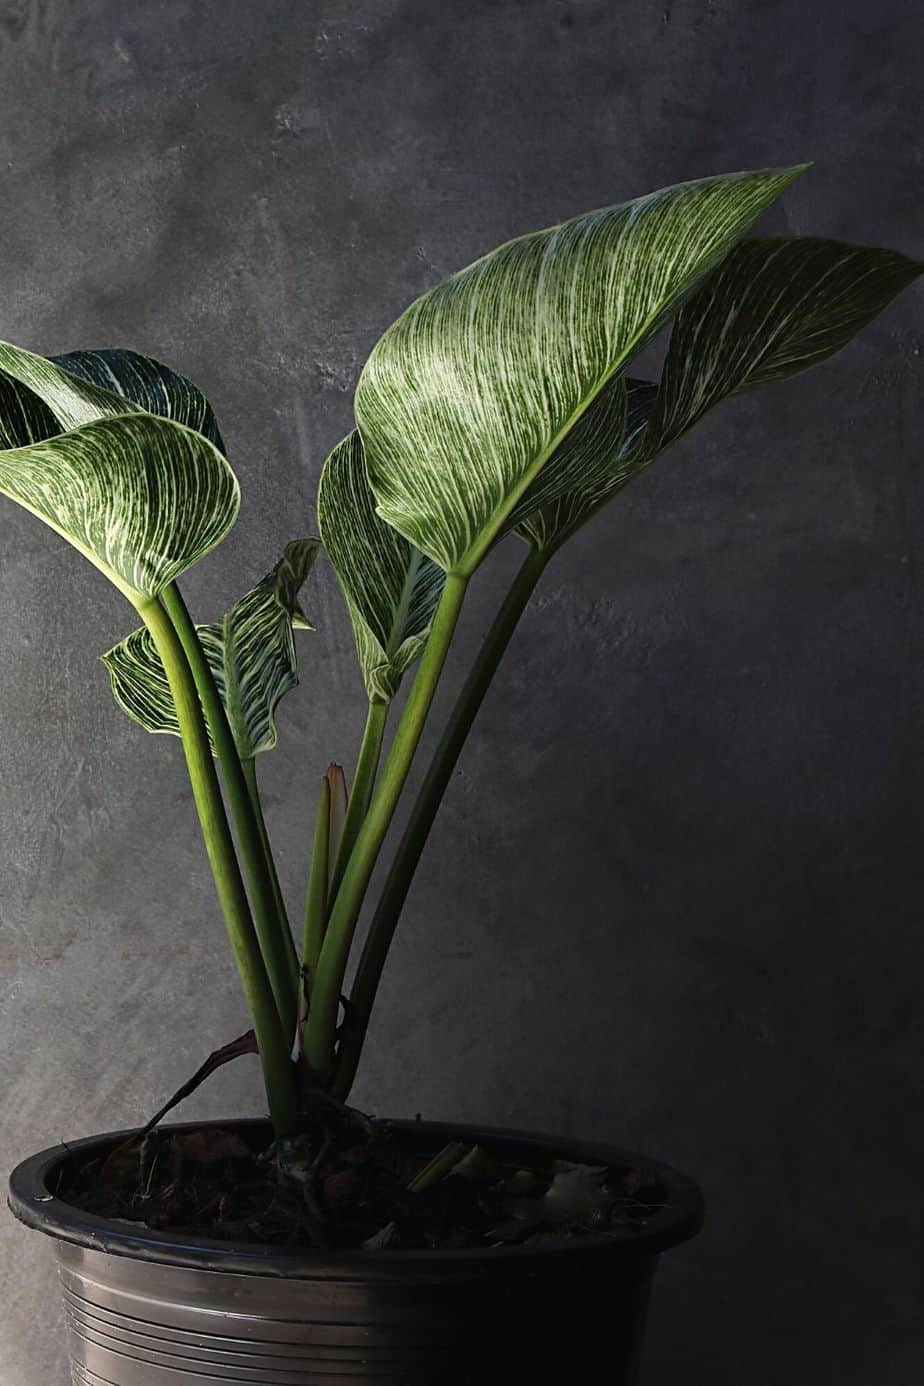 Avoid placing your Philodendron Birkin in dark areas as it prefers to grow in lighted areas